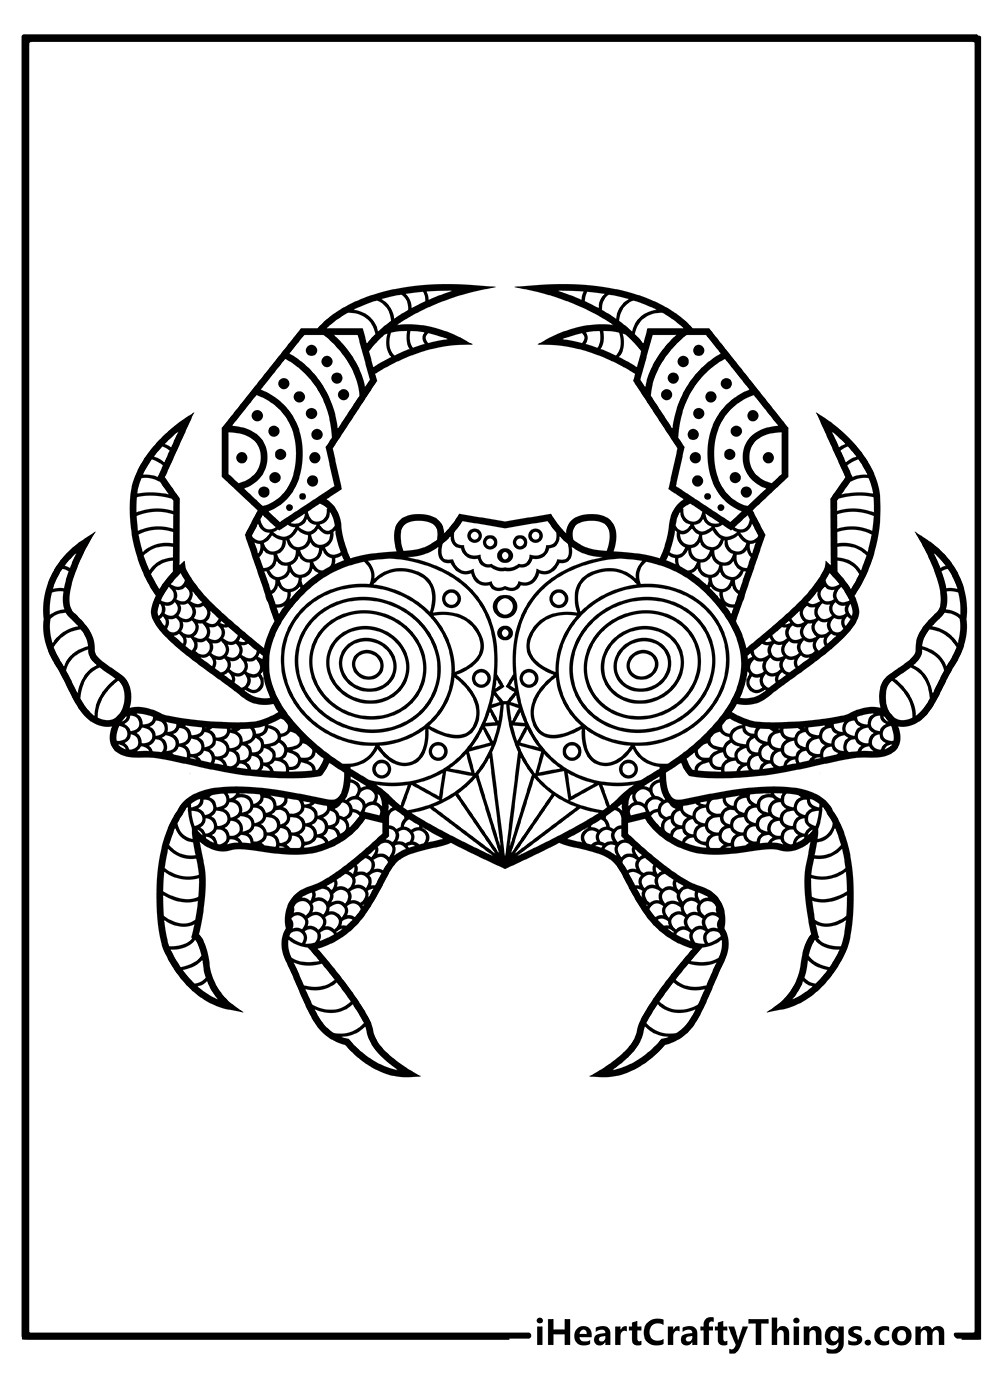 new Animal Coloring Pages for kids free printable